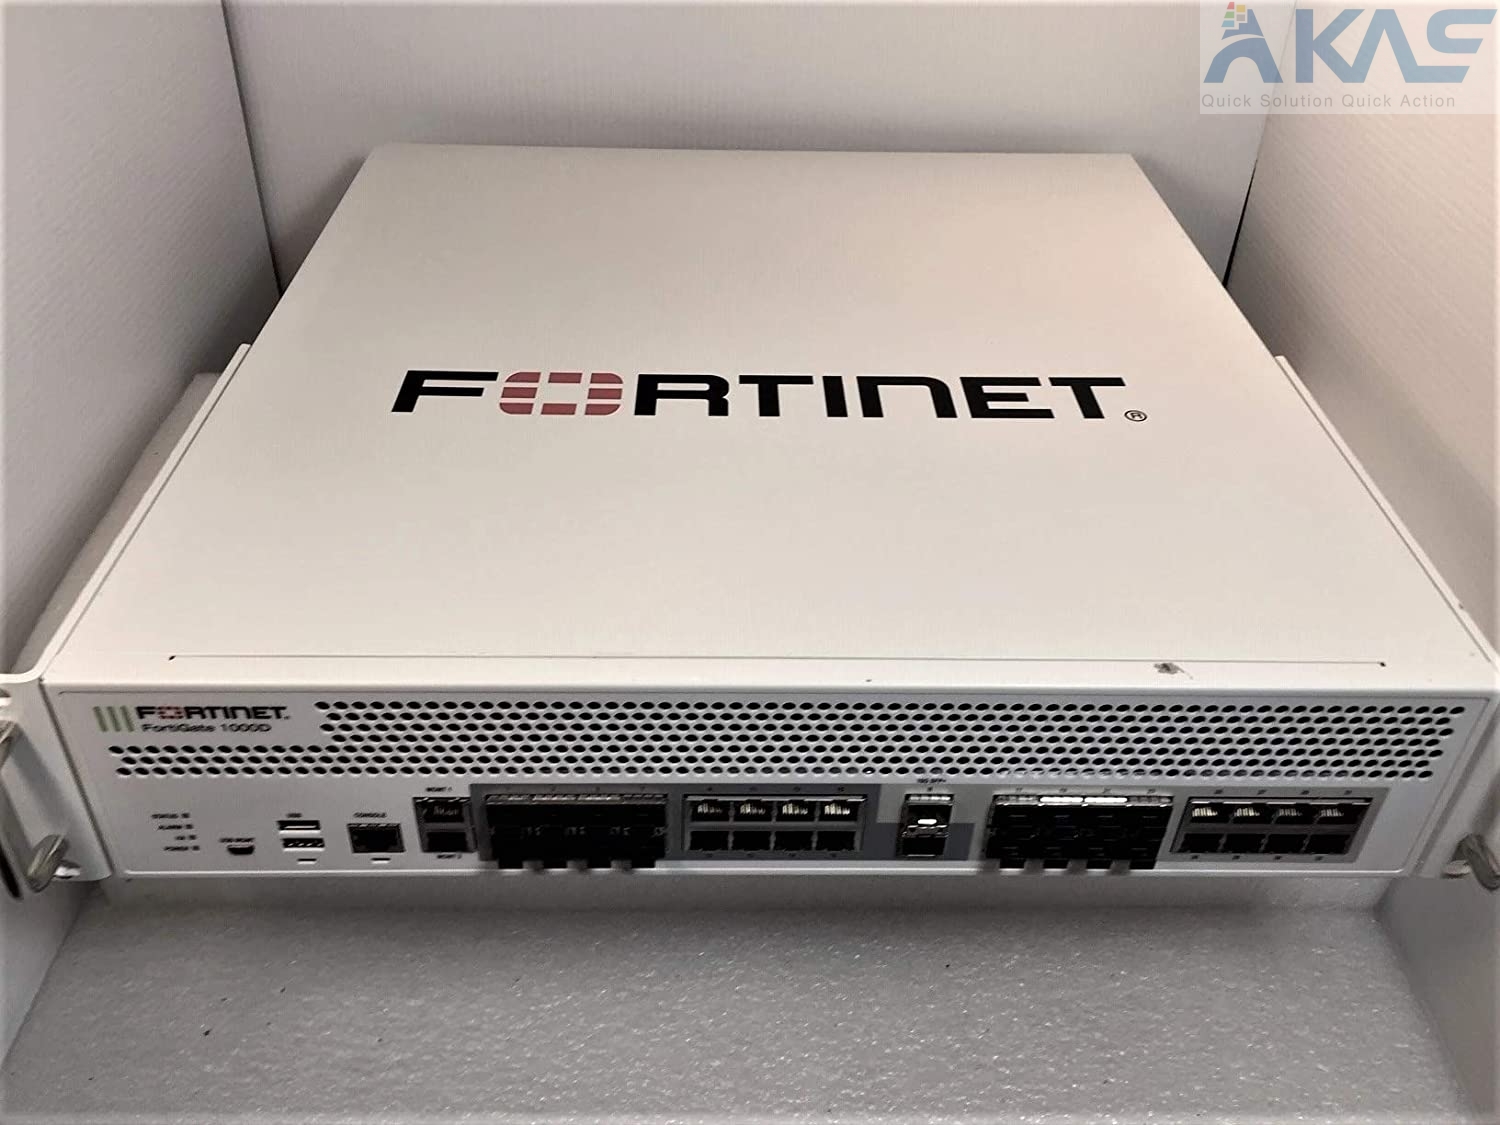 Fortinet | FortiGate 1000D | Network Security | Firewall Appliance